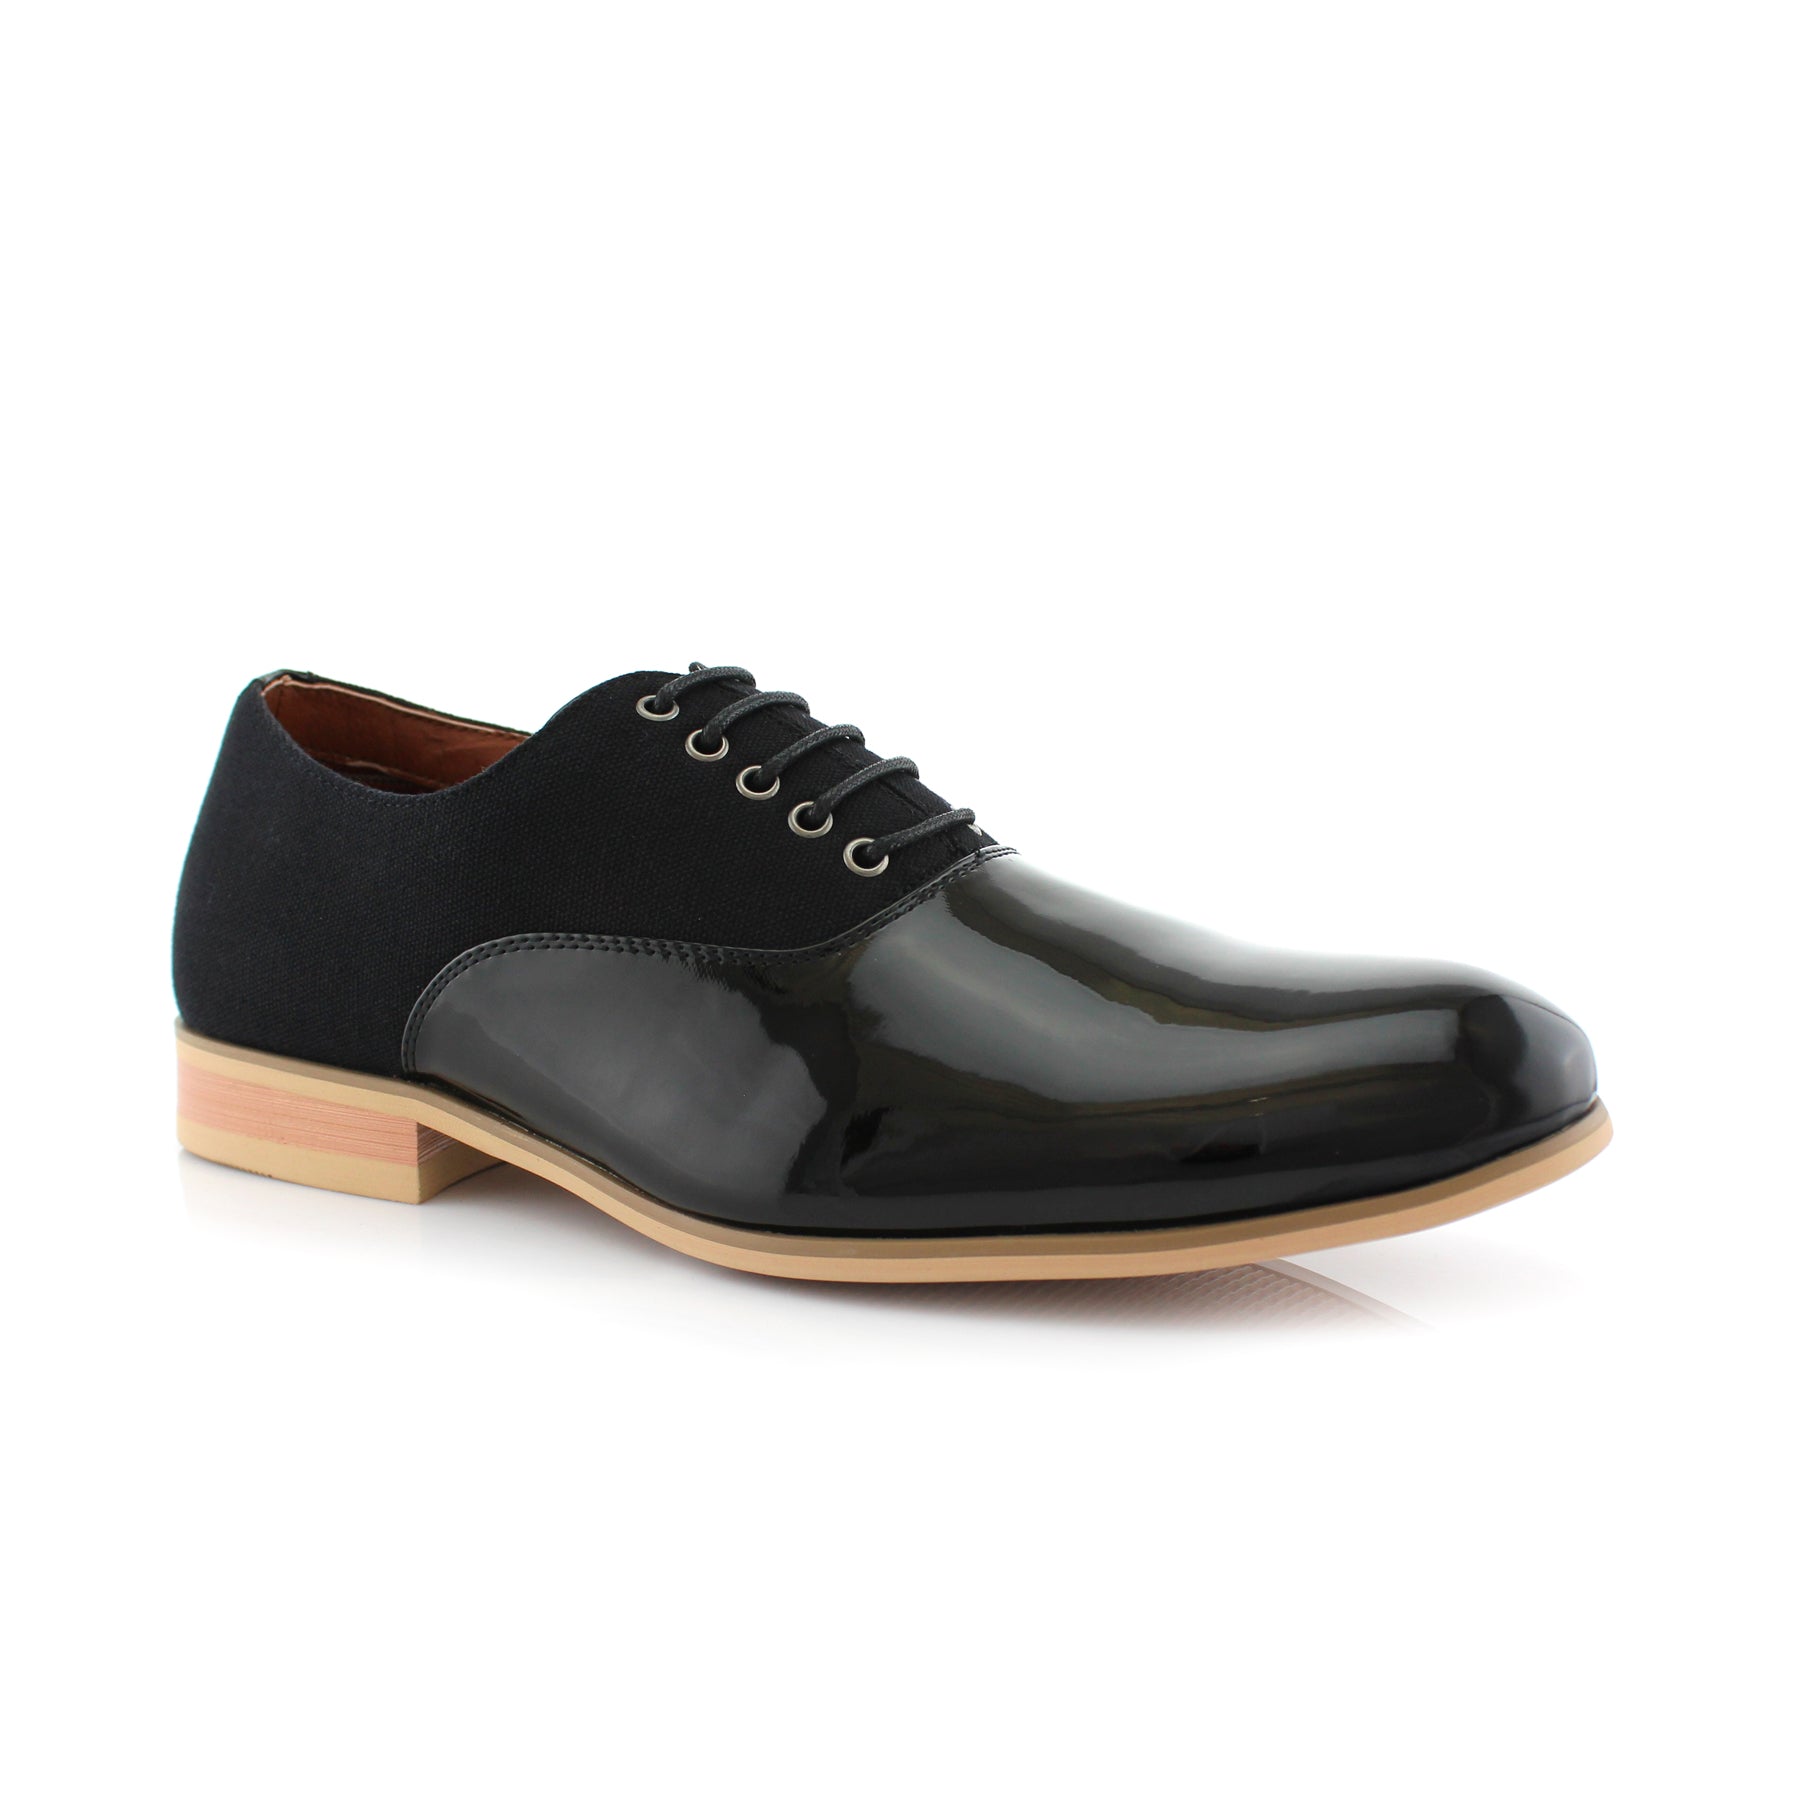 Duo-Textured Oxfords | Marcus by Ferro Aldo | Conal Footwear | Main Angle View